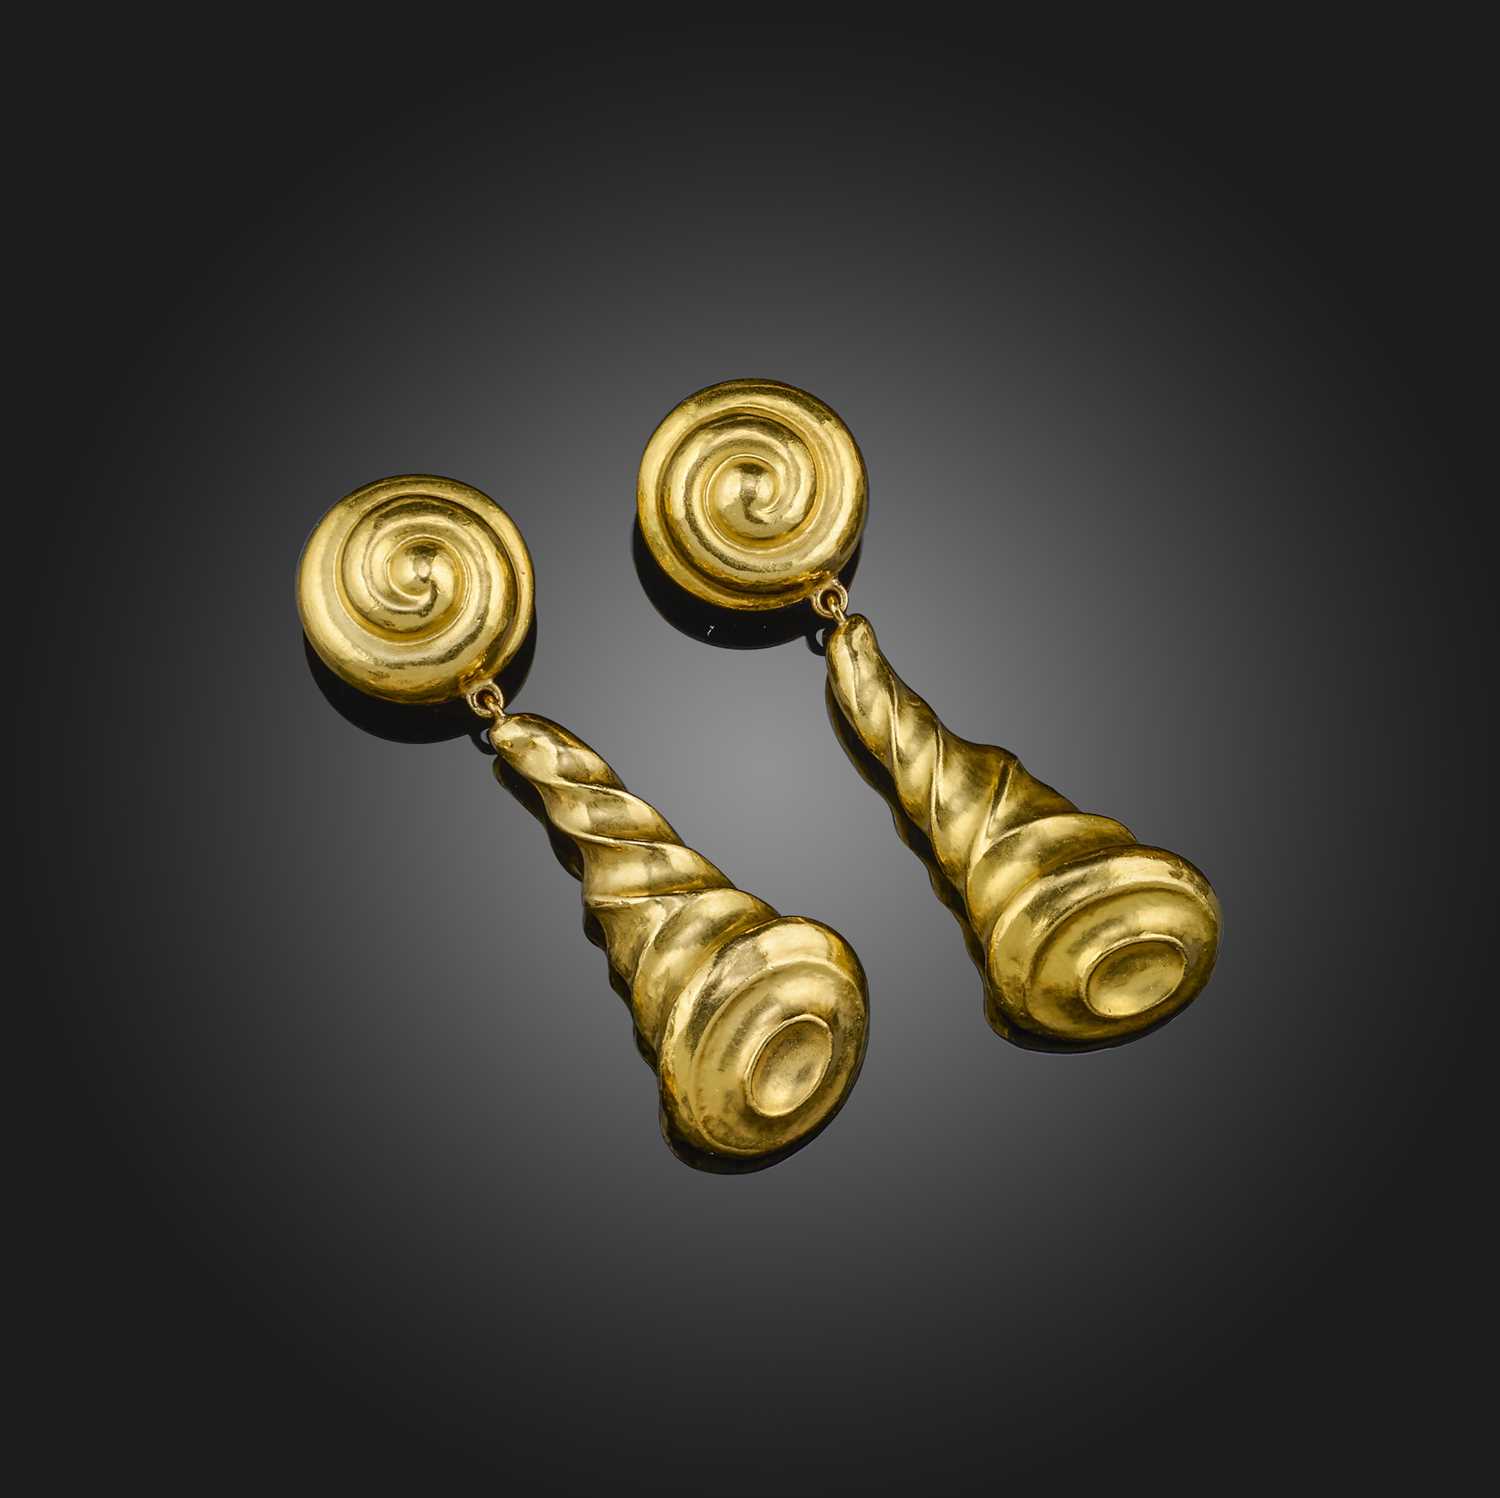 Lalaounis, a pair of gold seashell earrings, of stylised gold scrolling design, maker's mark and